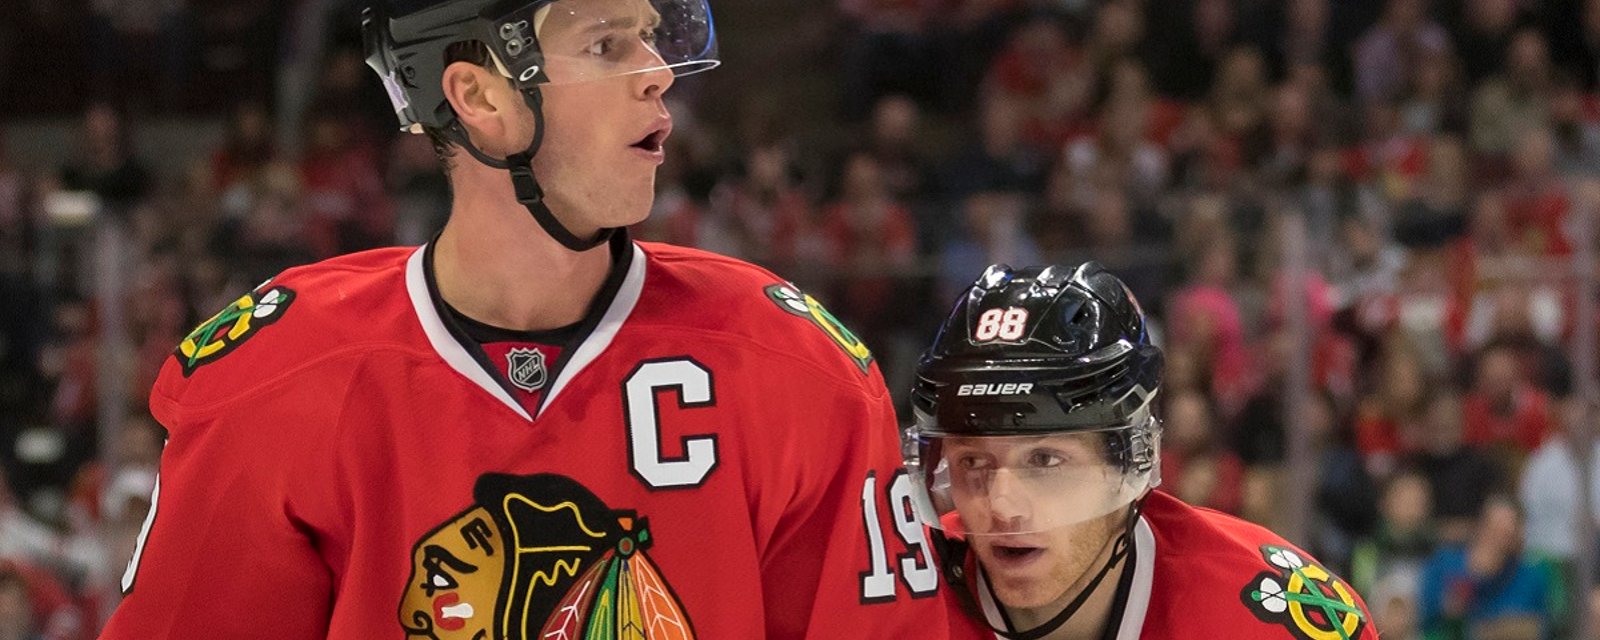 Patrick Kane reveals the punishment for Toews after their humiliation bet.